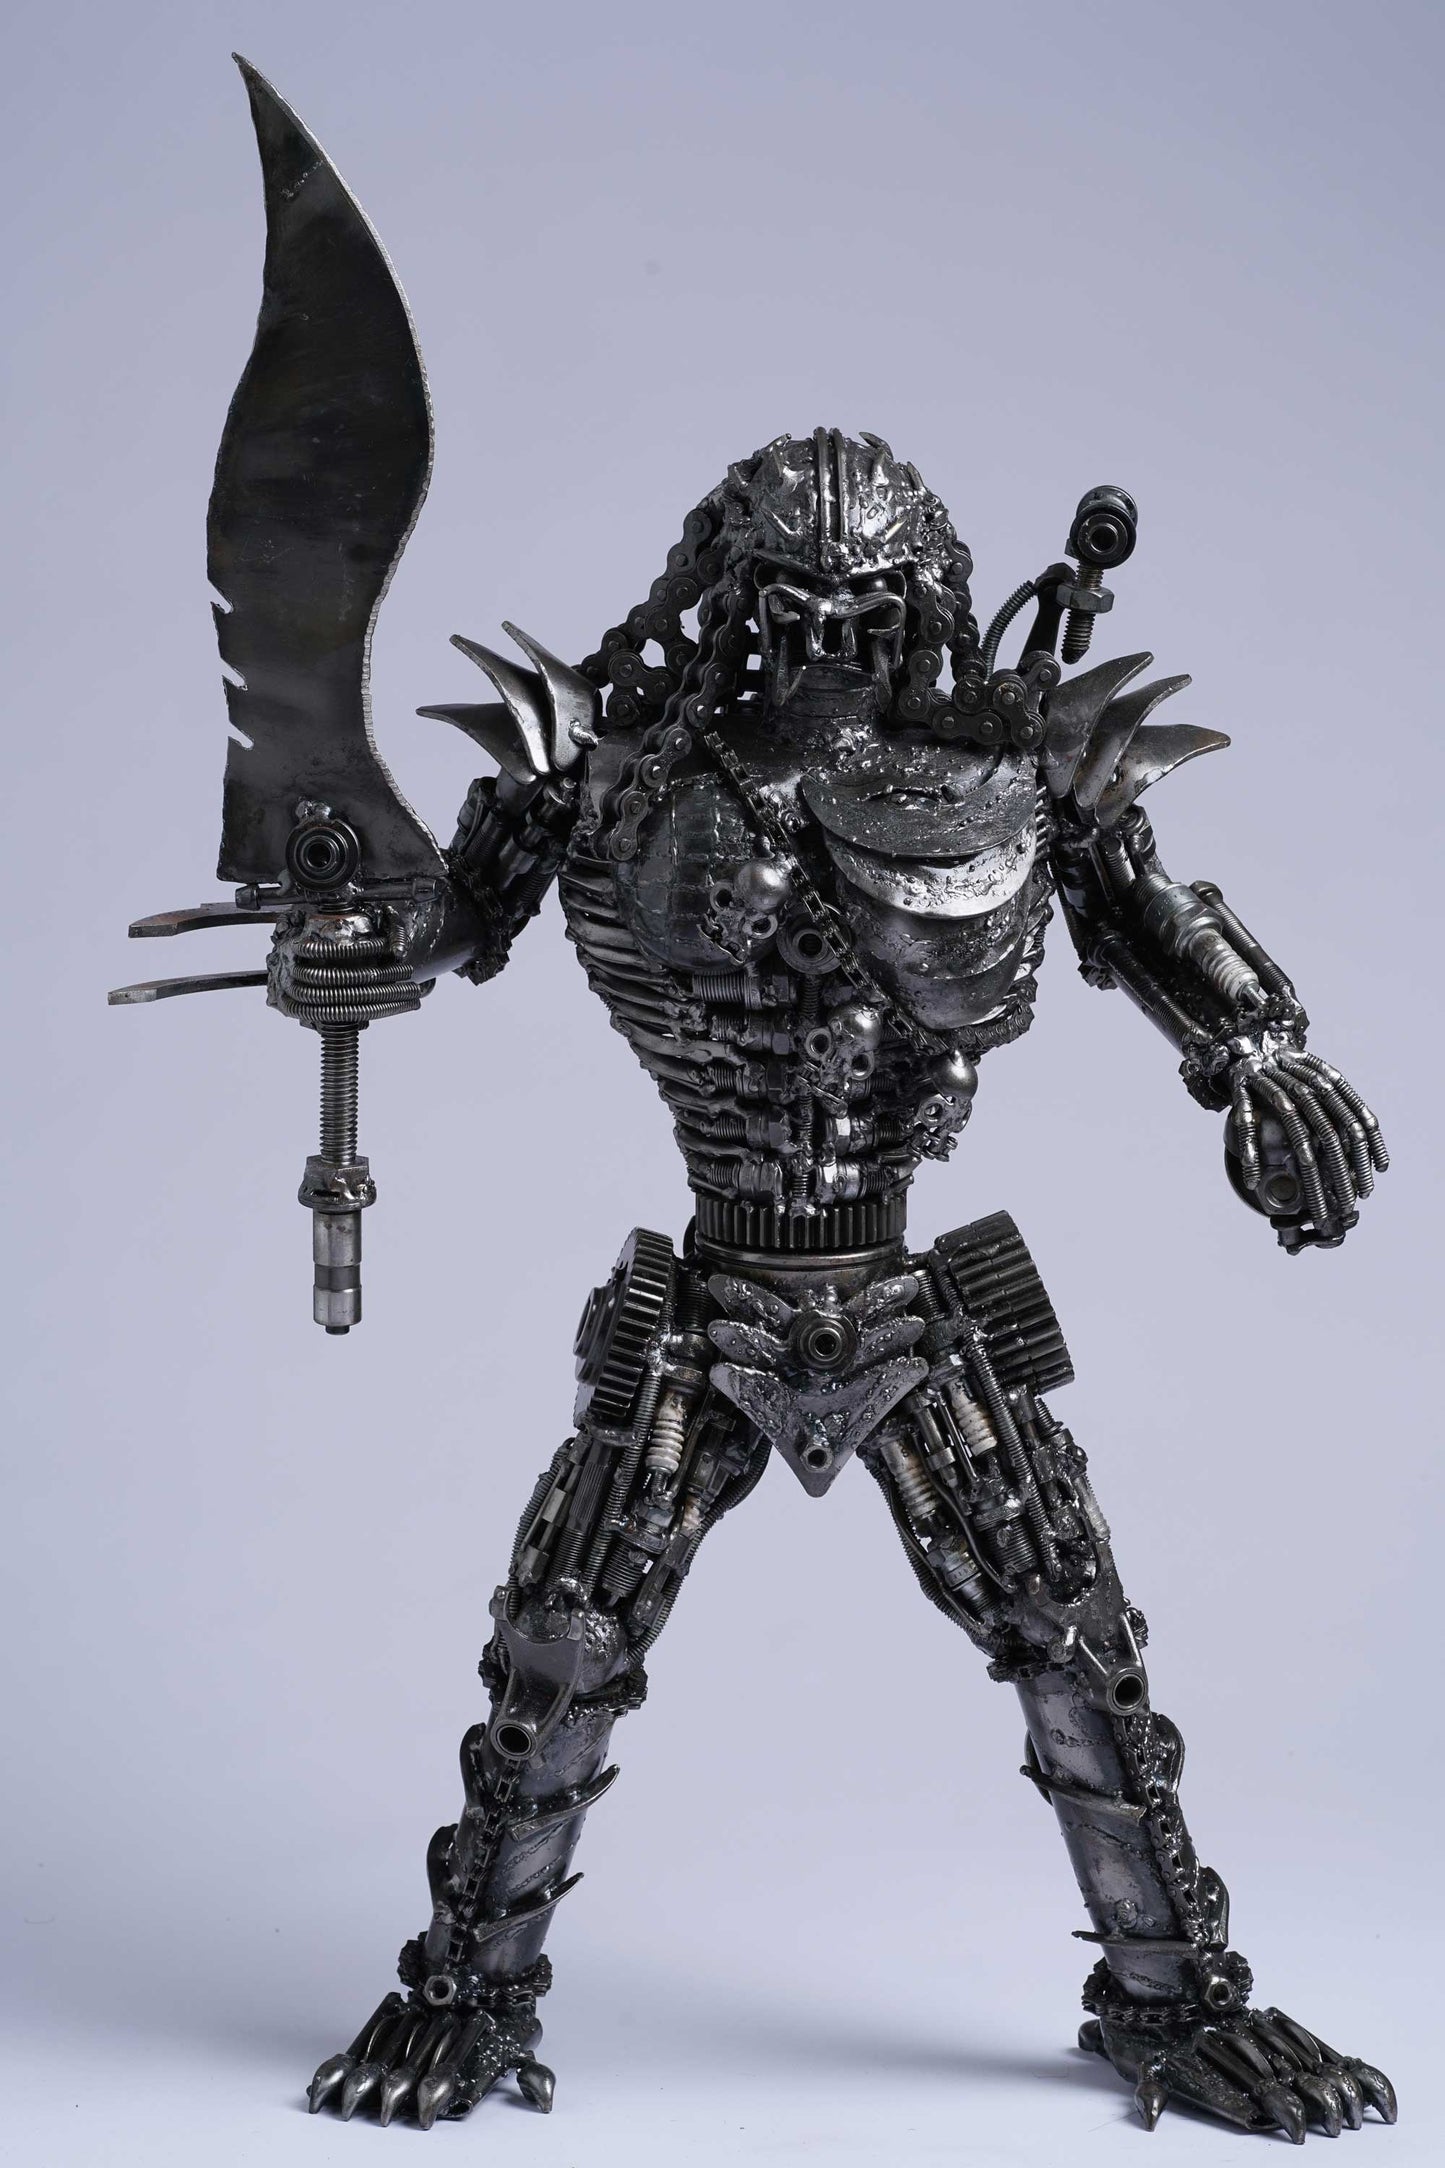 Predator metal action figure hand-crafted from junk auto parts